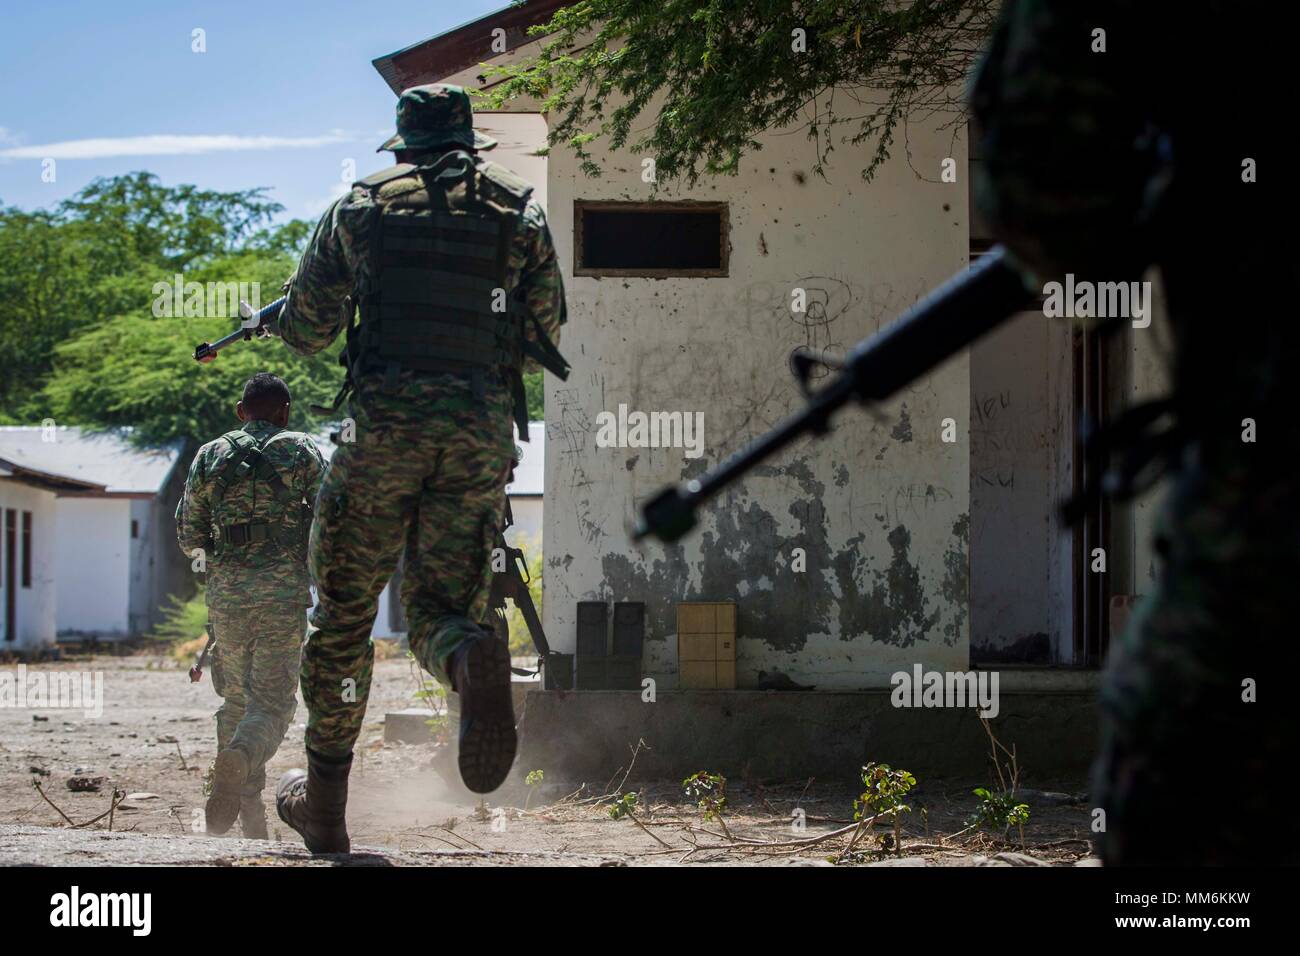 Members of the Falantil Forca de Defensa Timor Leste participate in Military Operation Urban Terrain training during Exercise Crocodilo as a part of Exercise Koa Moana 17 in Metinaro, Timor Leste, Sept. 7, 2017. Koa Moana 17 is designed to improve interoperability with our partners, enhance military-to-military relations, and expose the Marine Corps forces to different types of terrain for familiarity in the event of a natural disaster in the region.   (U.S. Marine Corps photo by MCIPAC Combat Camera Lance Cpl. Juan C. Bustos) Stock Photo